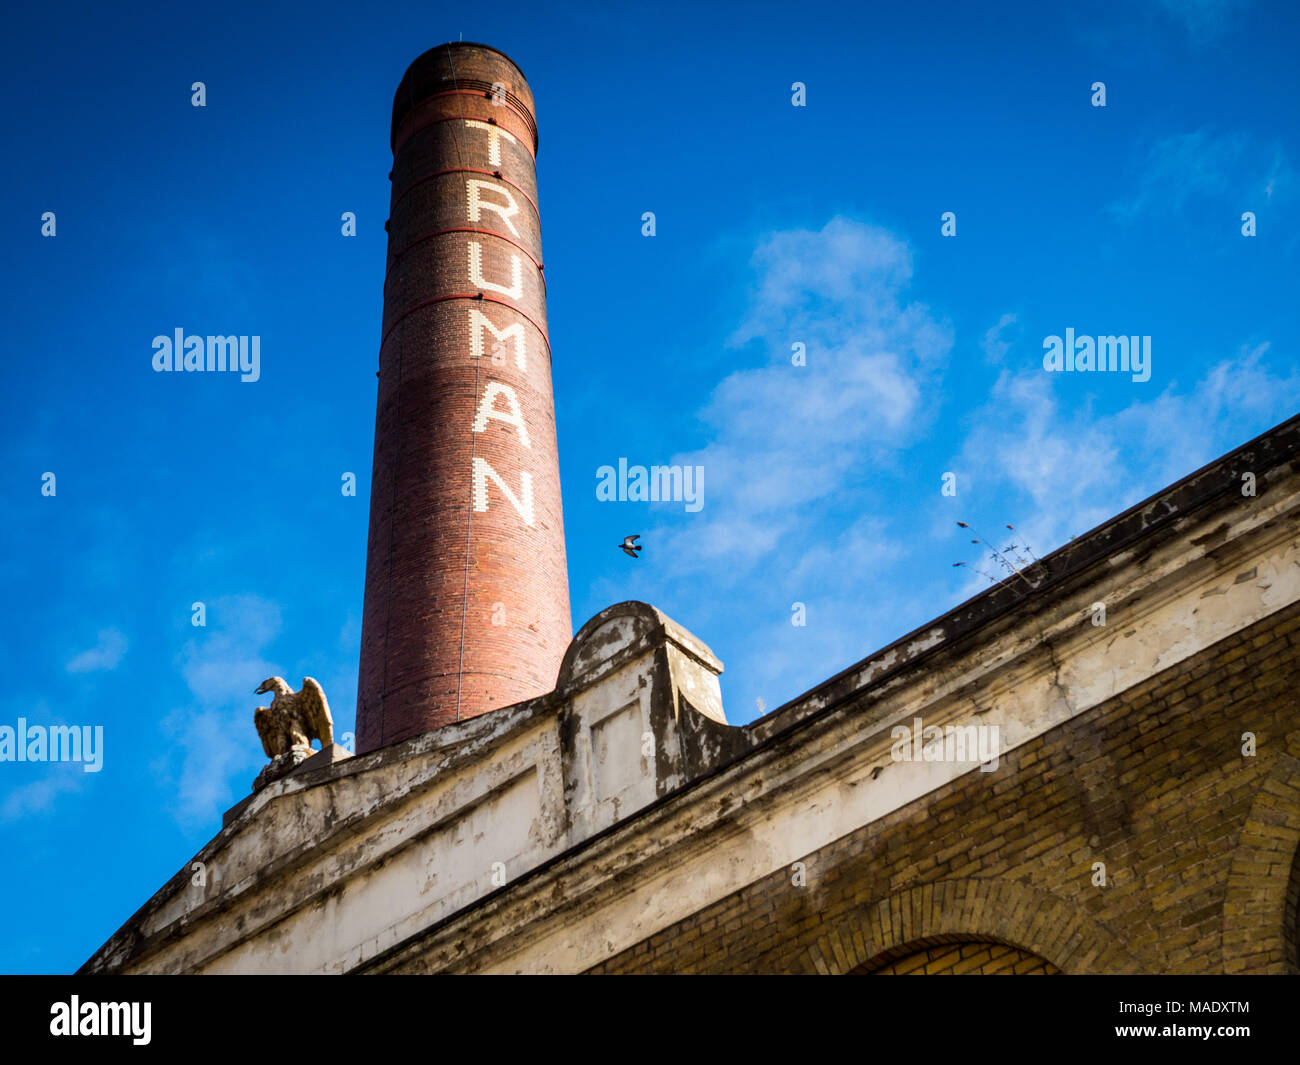 Brick Lane London - The Old Truman Brewery in London's Popular Brick Lane, Shoreditch, East London. Banque D'Images